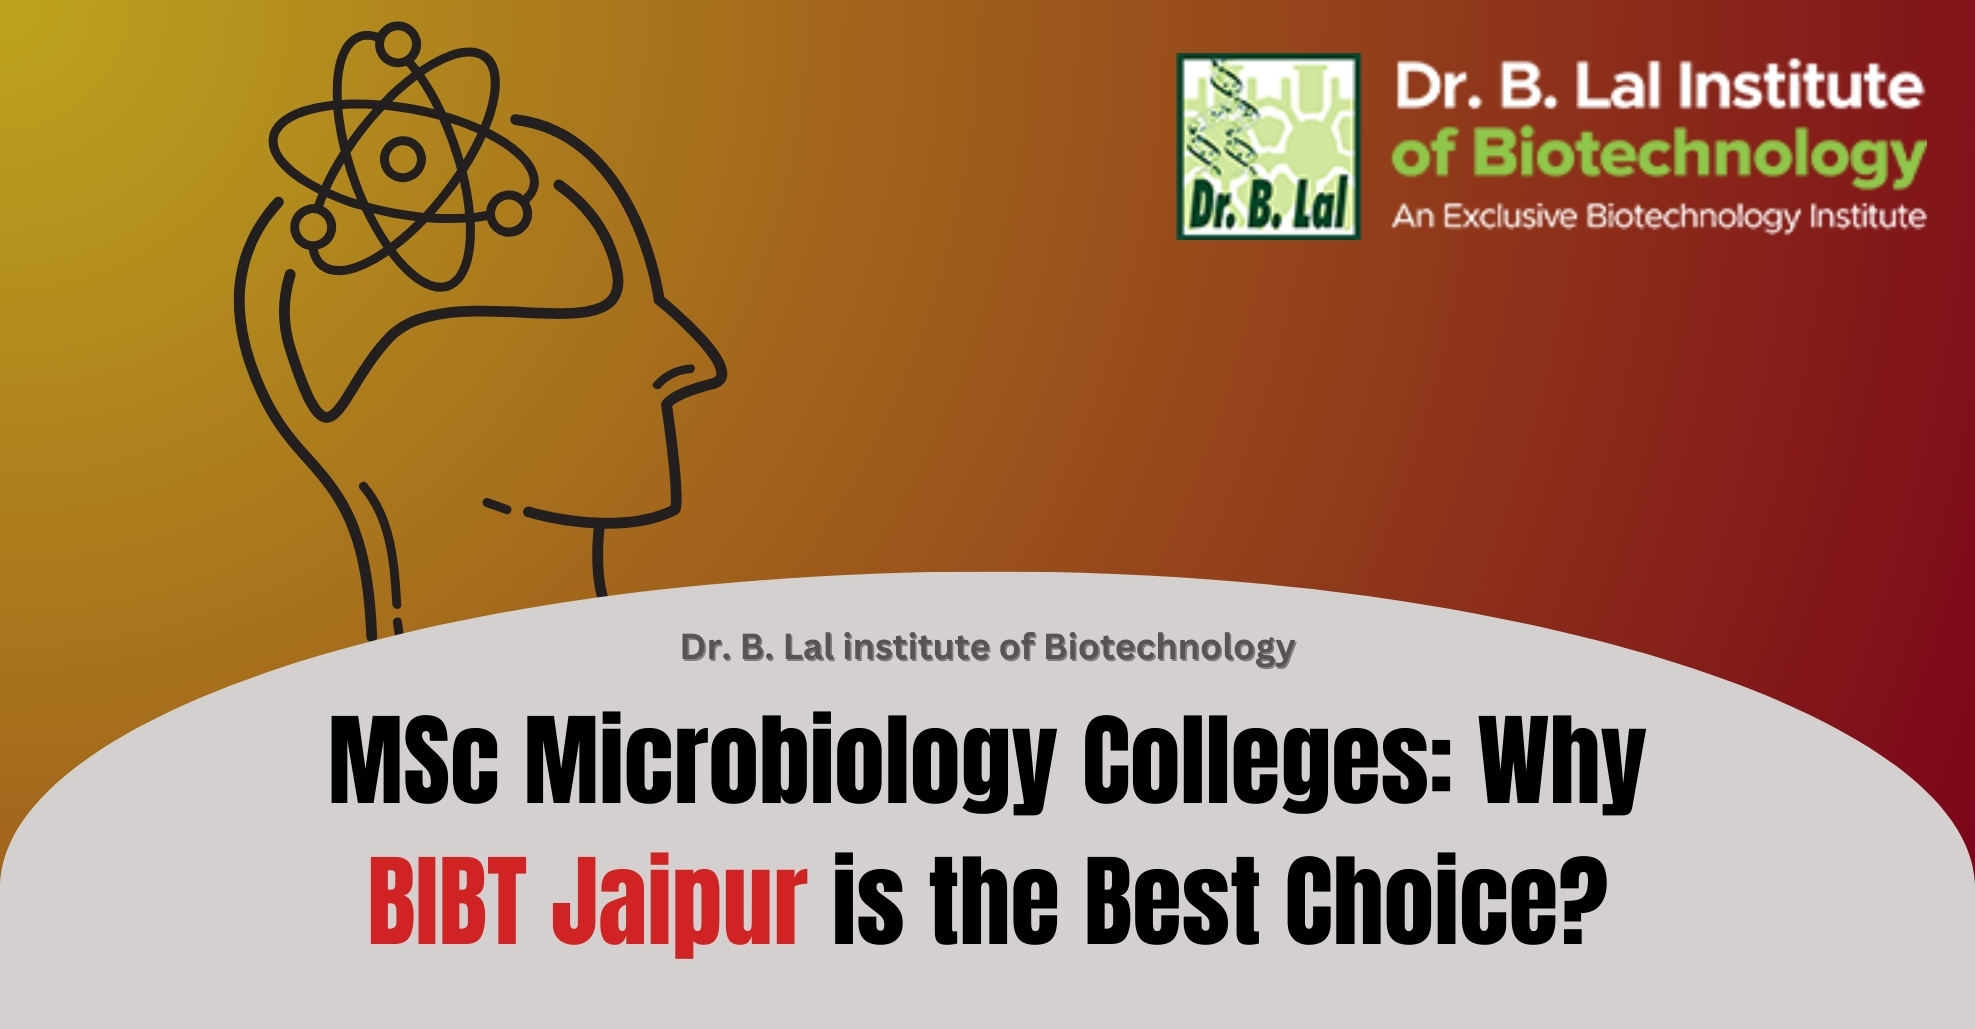 MSc Microbiology Colleges: Why BIBT Jaipur is the Best Choice